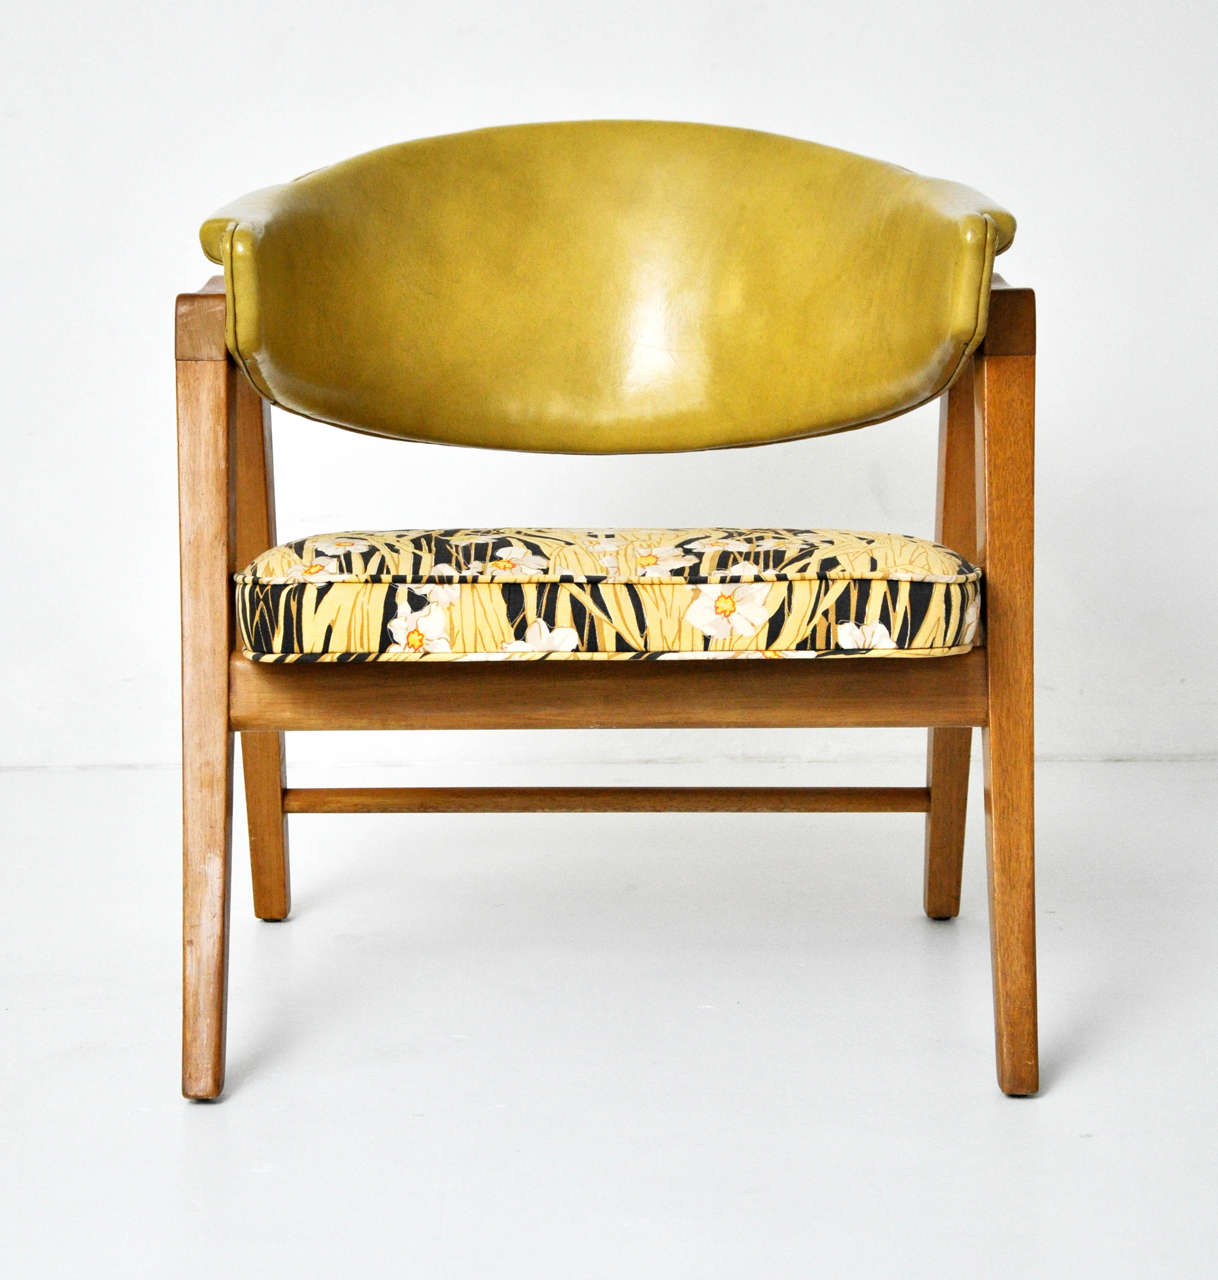 Sculptural frame lounge chair designed by Edward Wormley for Dunbar.